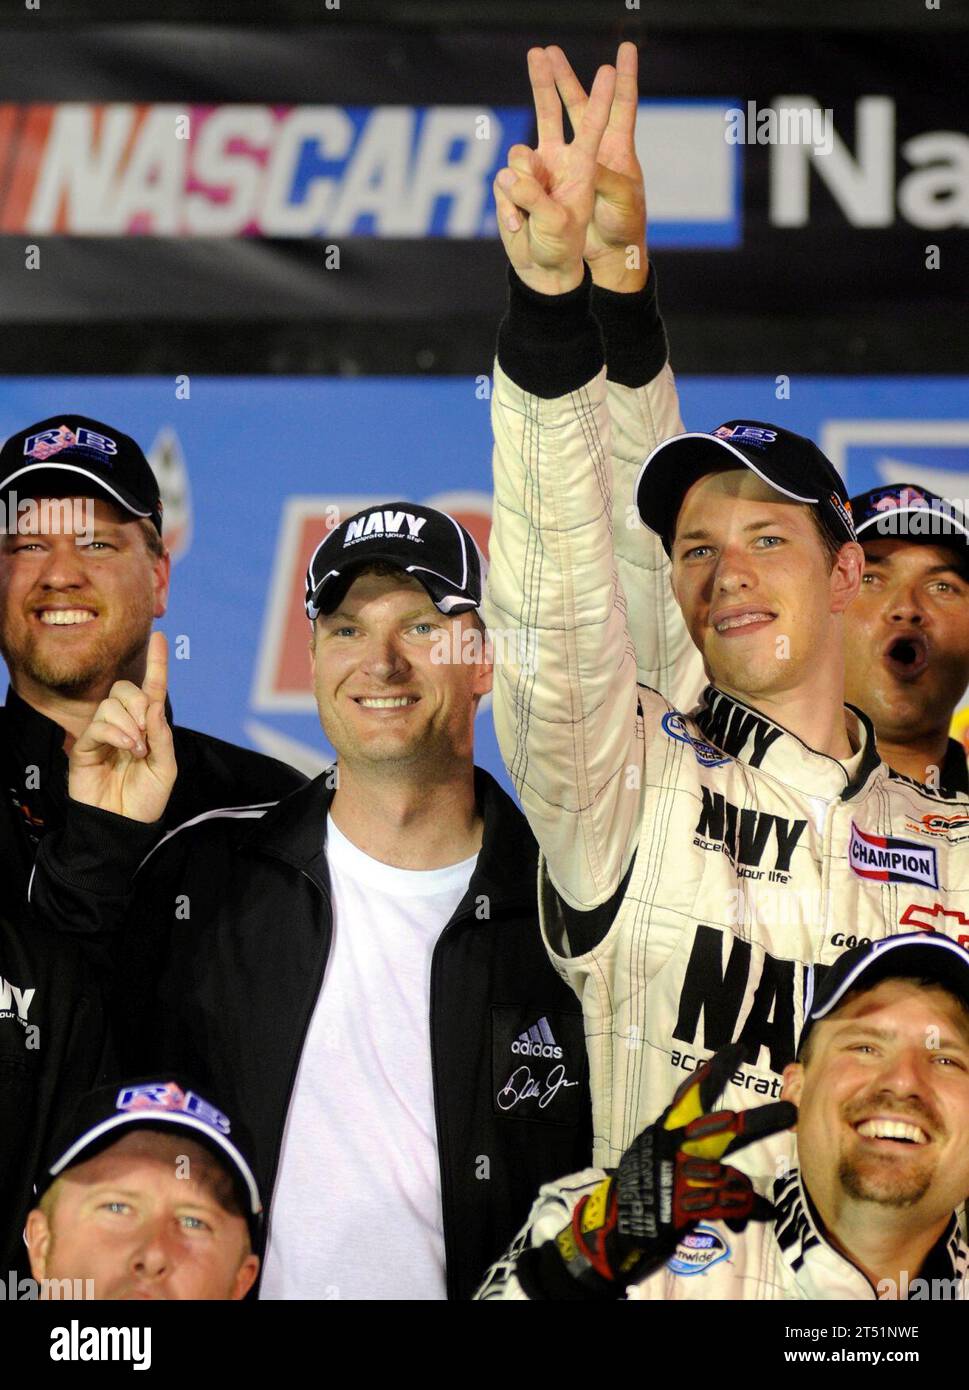 0808225345W-259 BRISTOL, Tenn. (Aug. 22, 2008) JR Motorsports co-owner Dale Earnhardt, Jr., center, celebrates with driver Brad Keselowski, right, and the rest of the No. 88 U.S. Navy Chevrolet Monte Carlo team in victory lane after winning the NASCAR Nationwide Series Food City 250 at Bristol Motor Speedway in Bristol. Keselowski overcame a 37th place starting position to claim his second career victory and won second place overall in the nationwide championship standings. Navy Stock Photo